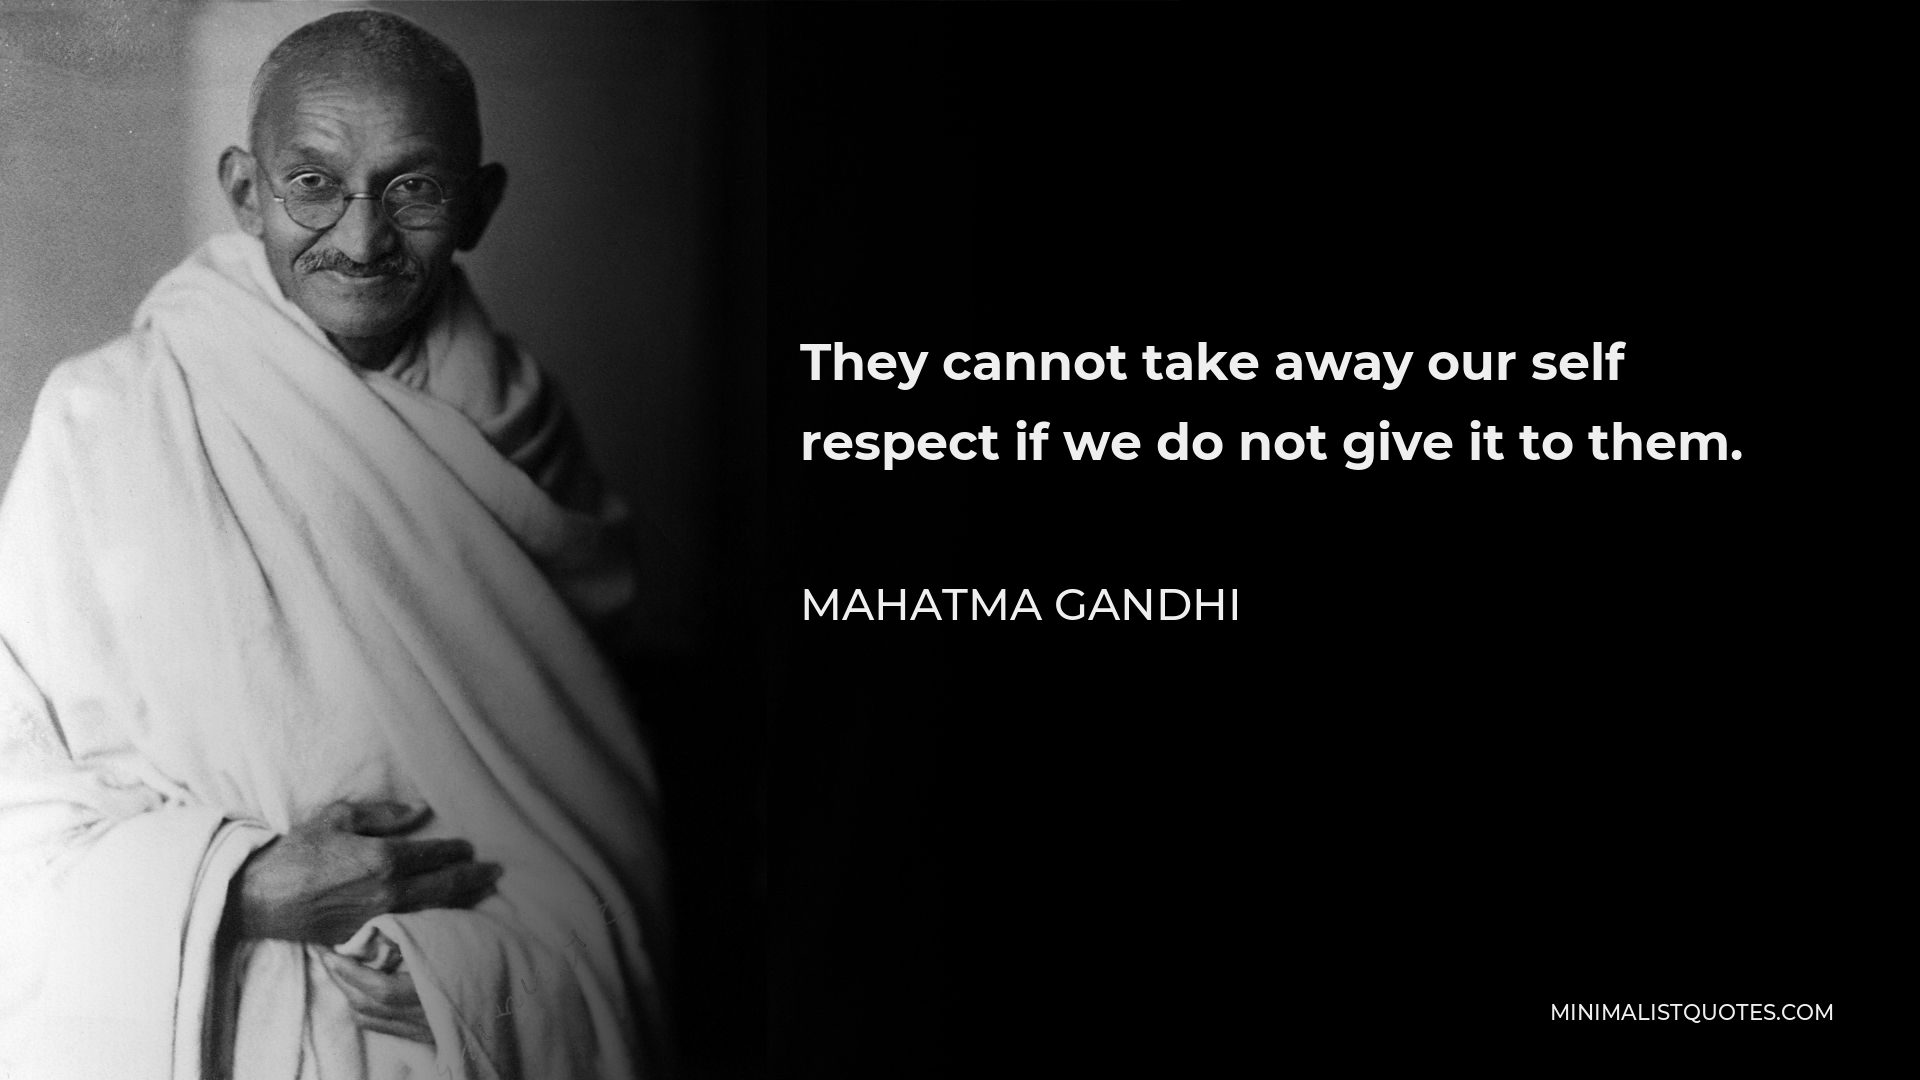 Mahatma Gandhi Quote - They cannot take away our self respect if we do not give it to them.